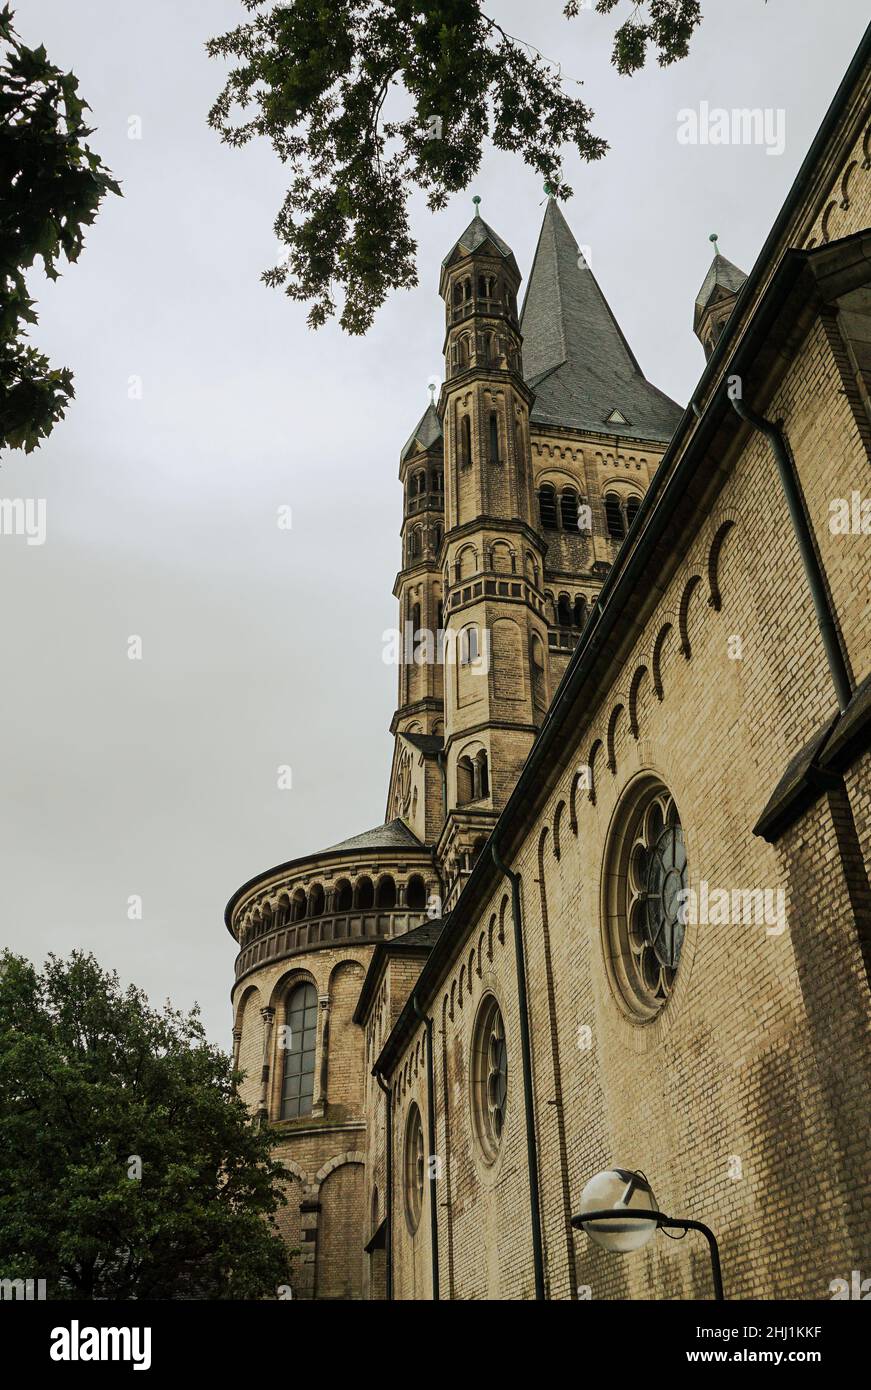 An old Gothic church on a cloudy day Stock Photo